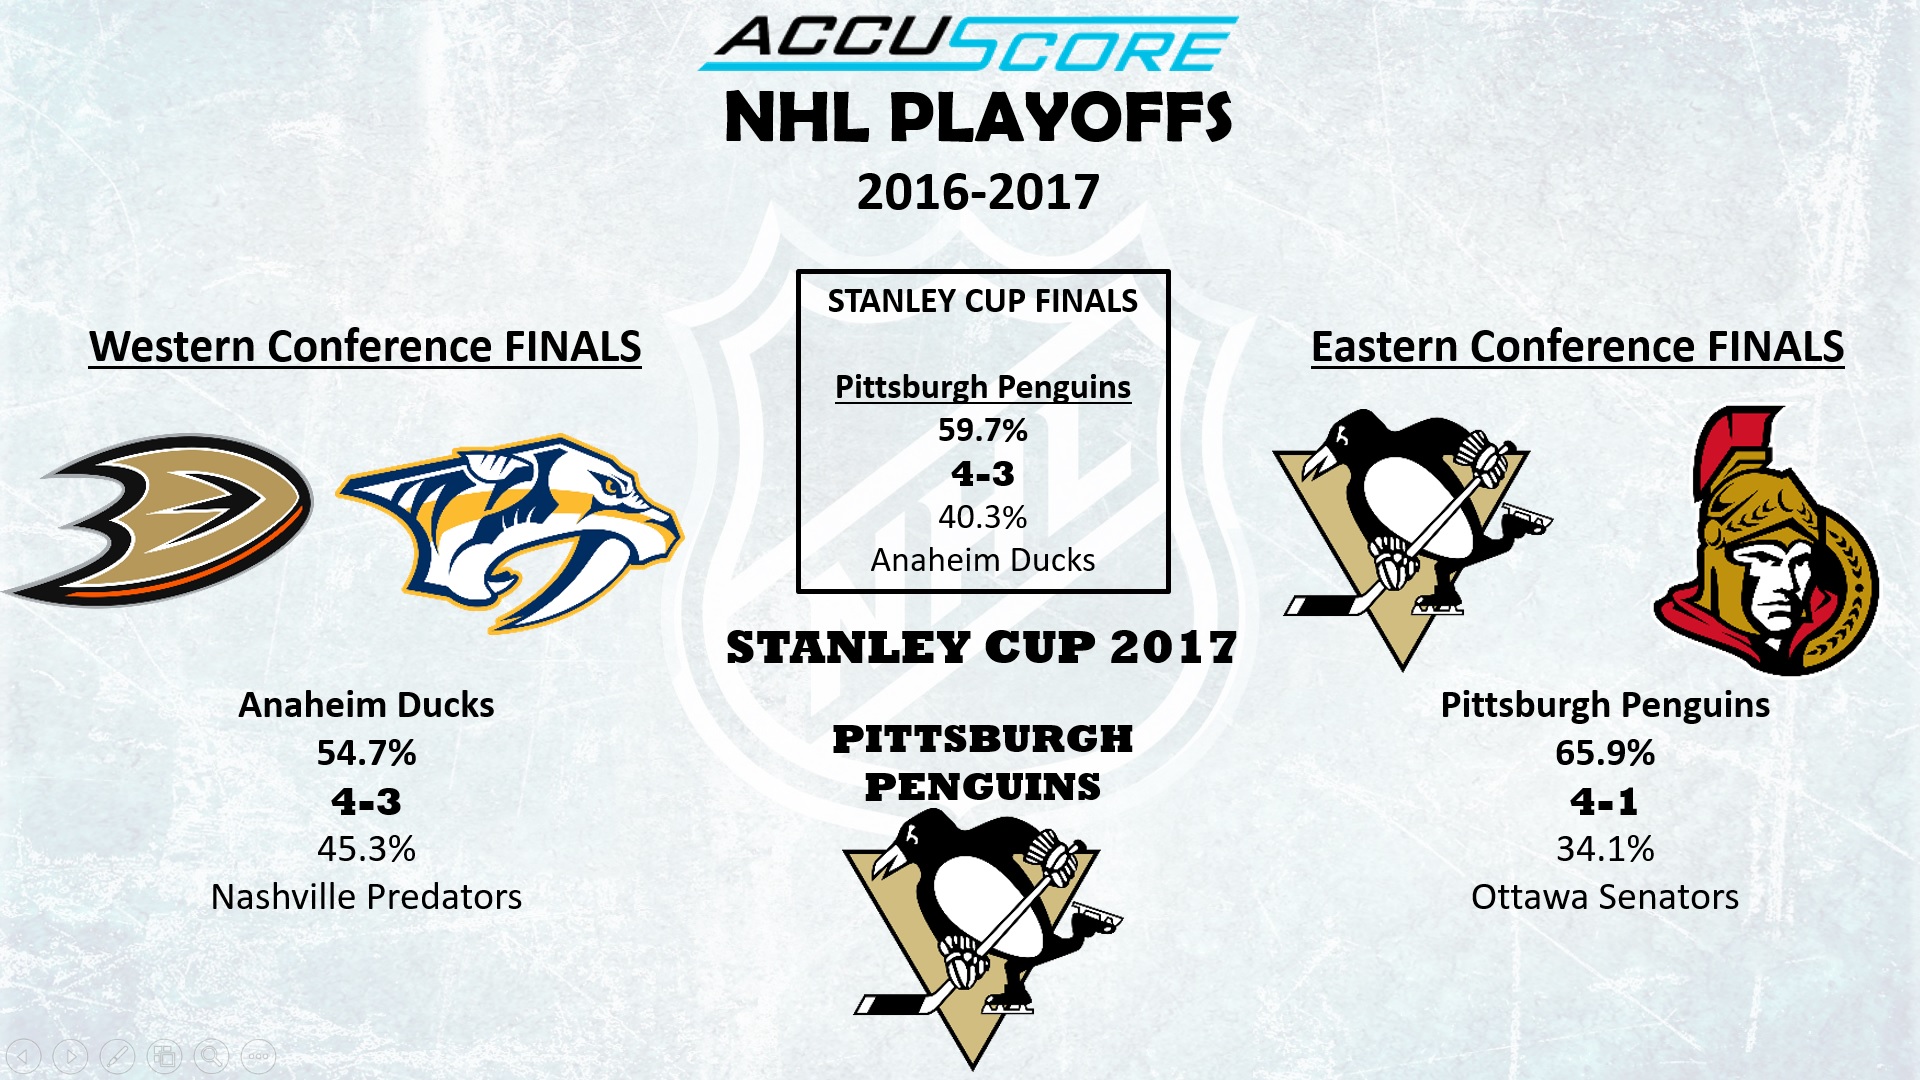 Accuscore's NHL Stanley Cup Playoffs 2017 Conference Finals Prediction